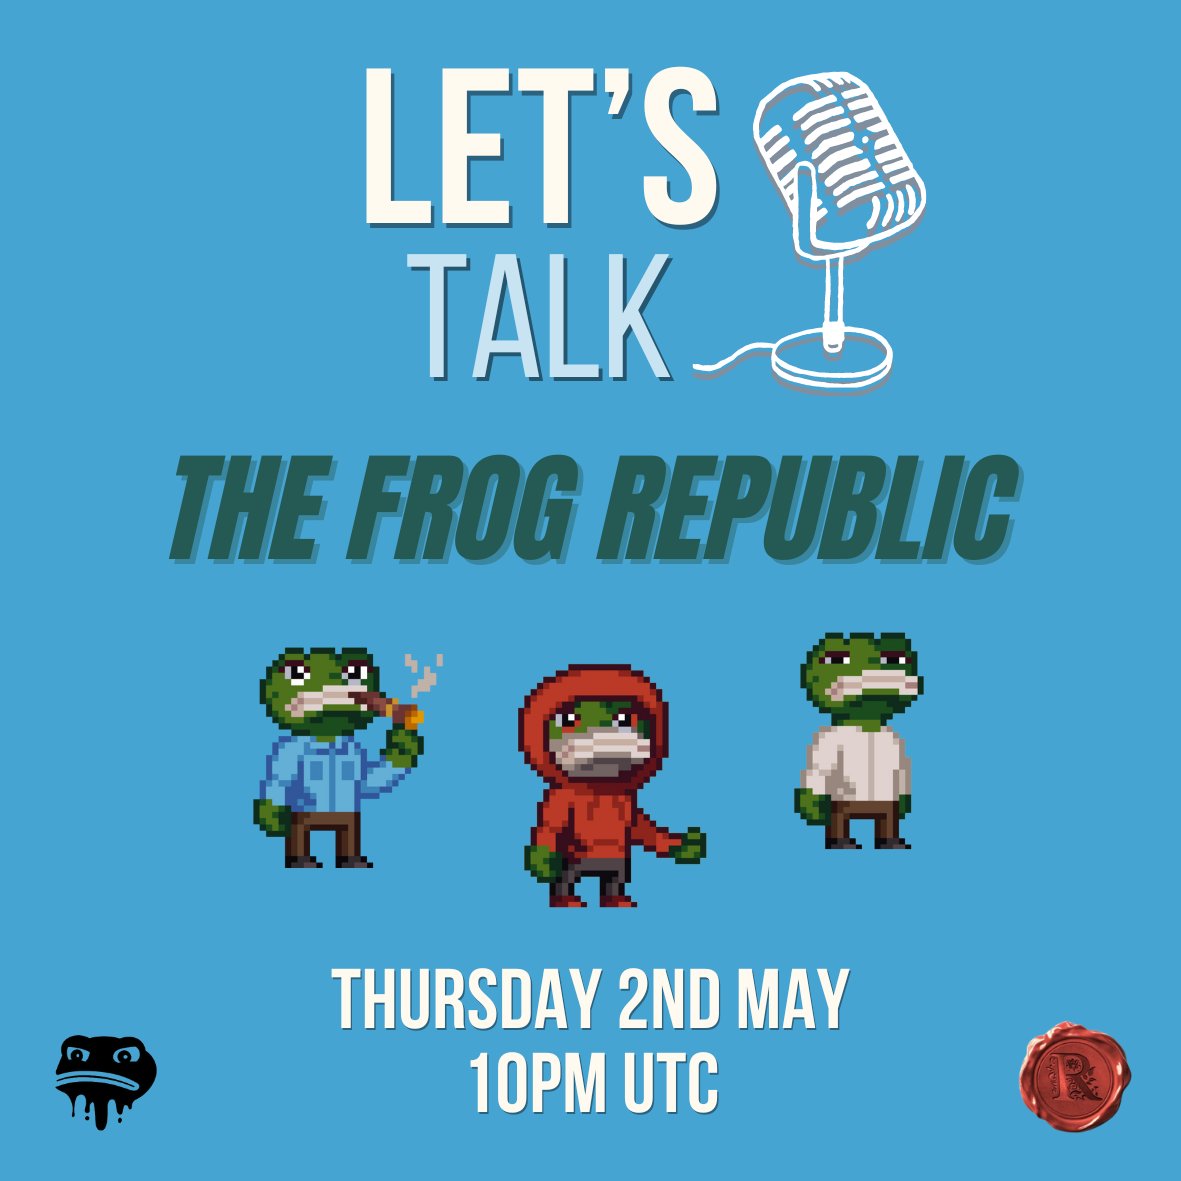 Join us Thursday, May 2nd at 10pm UTC as we talk with @Pons_ETH about @ThePlagueNFT's move to Cardano with The Frog Republic! 🐸 Hosted by myself and @UnpopularEL, we'll discuss the impact on Cardano, DAO plans PLUS we're giving away 5 WL for the upcoming mint! Don't miss out!…